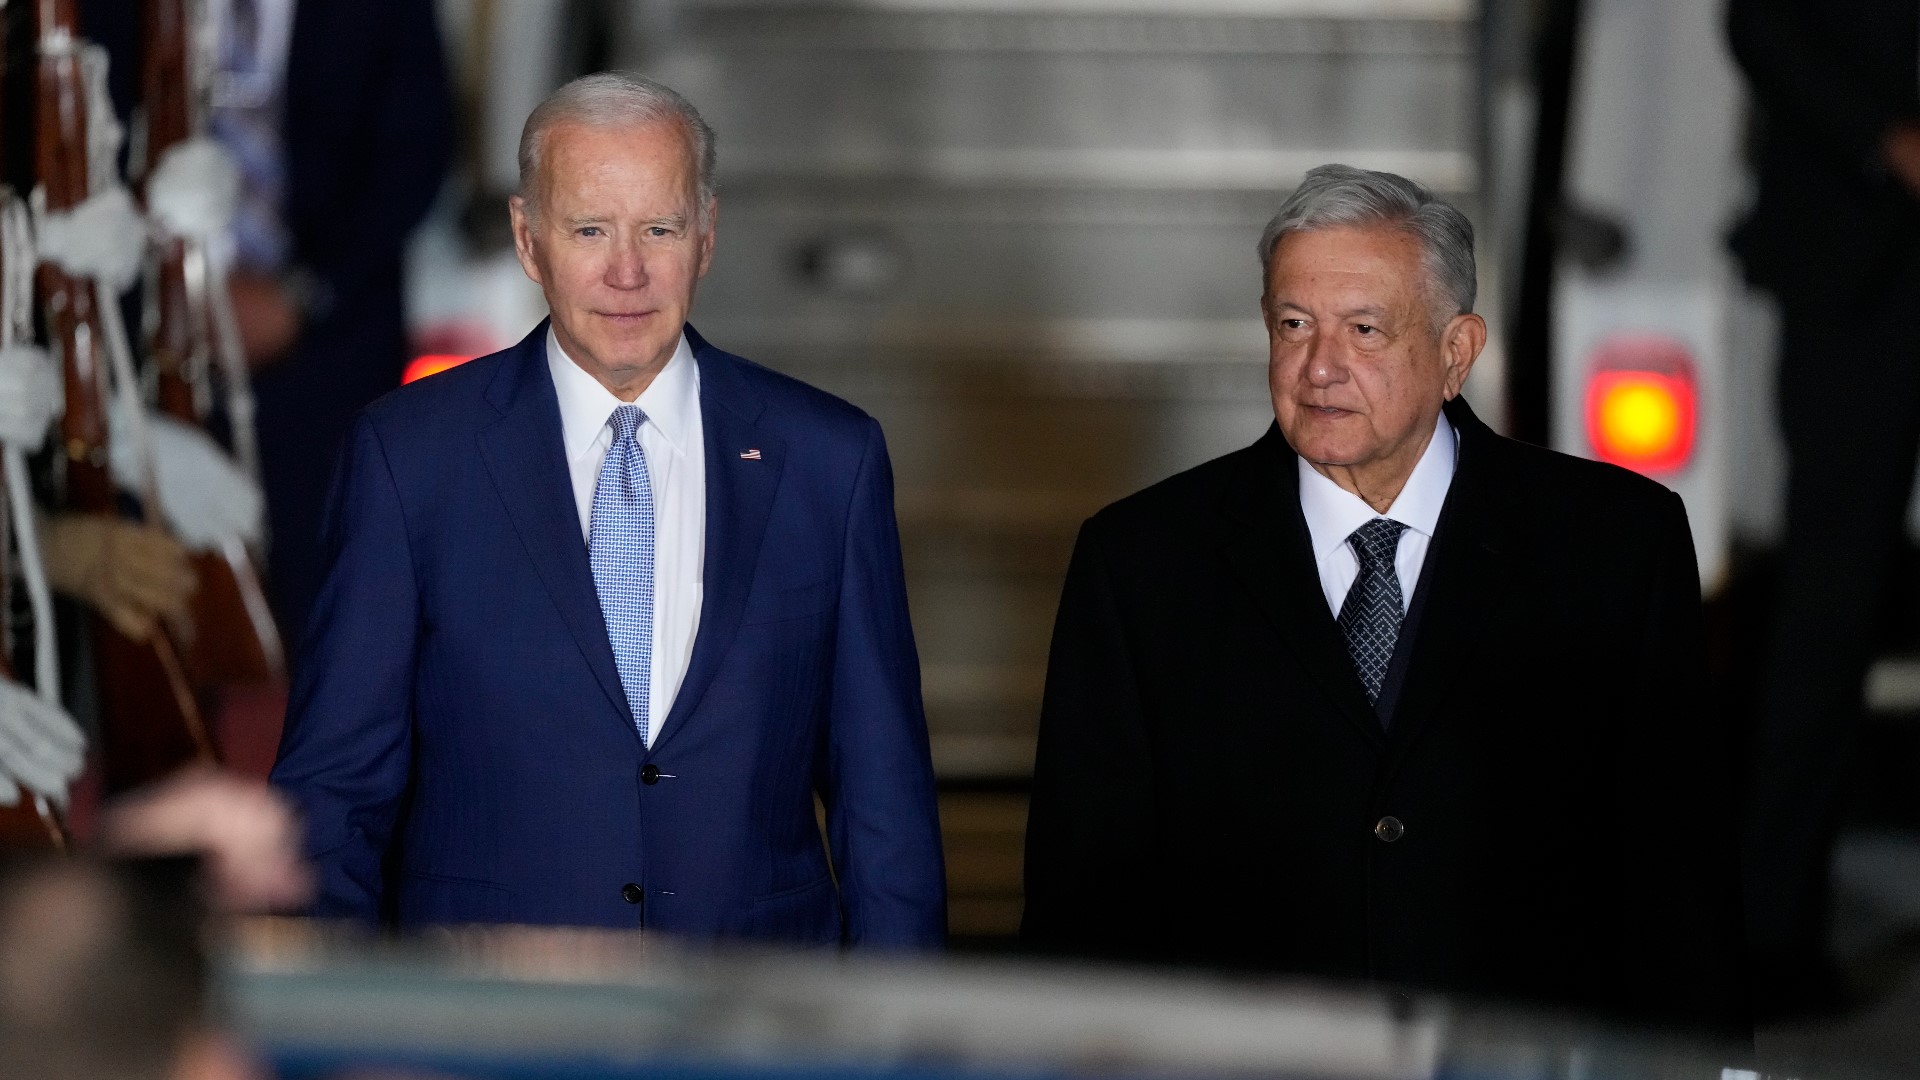 President Biden is in Mexico for the North American Leaders Summit with the presidents of Mexico and Canada.